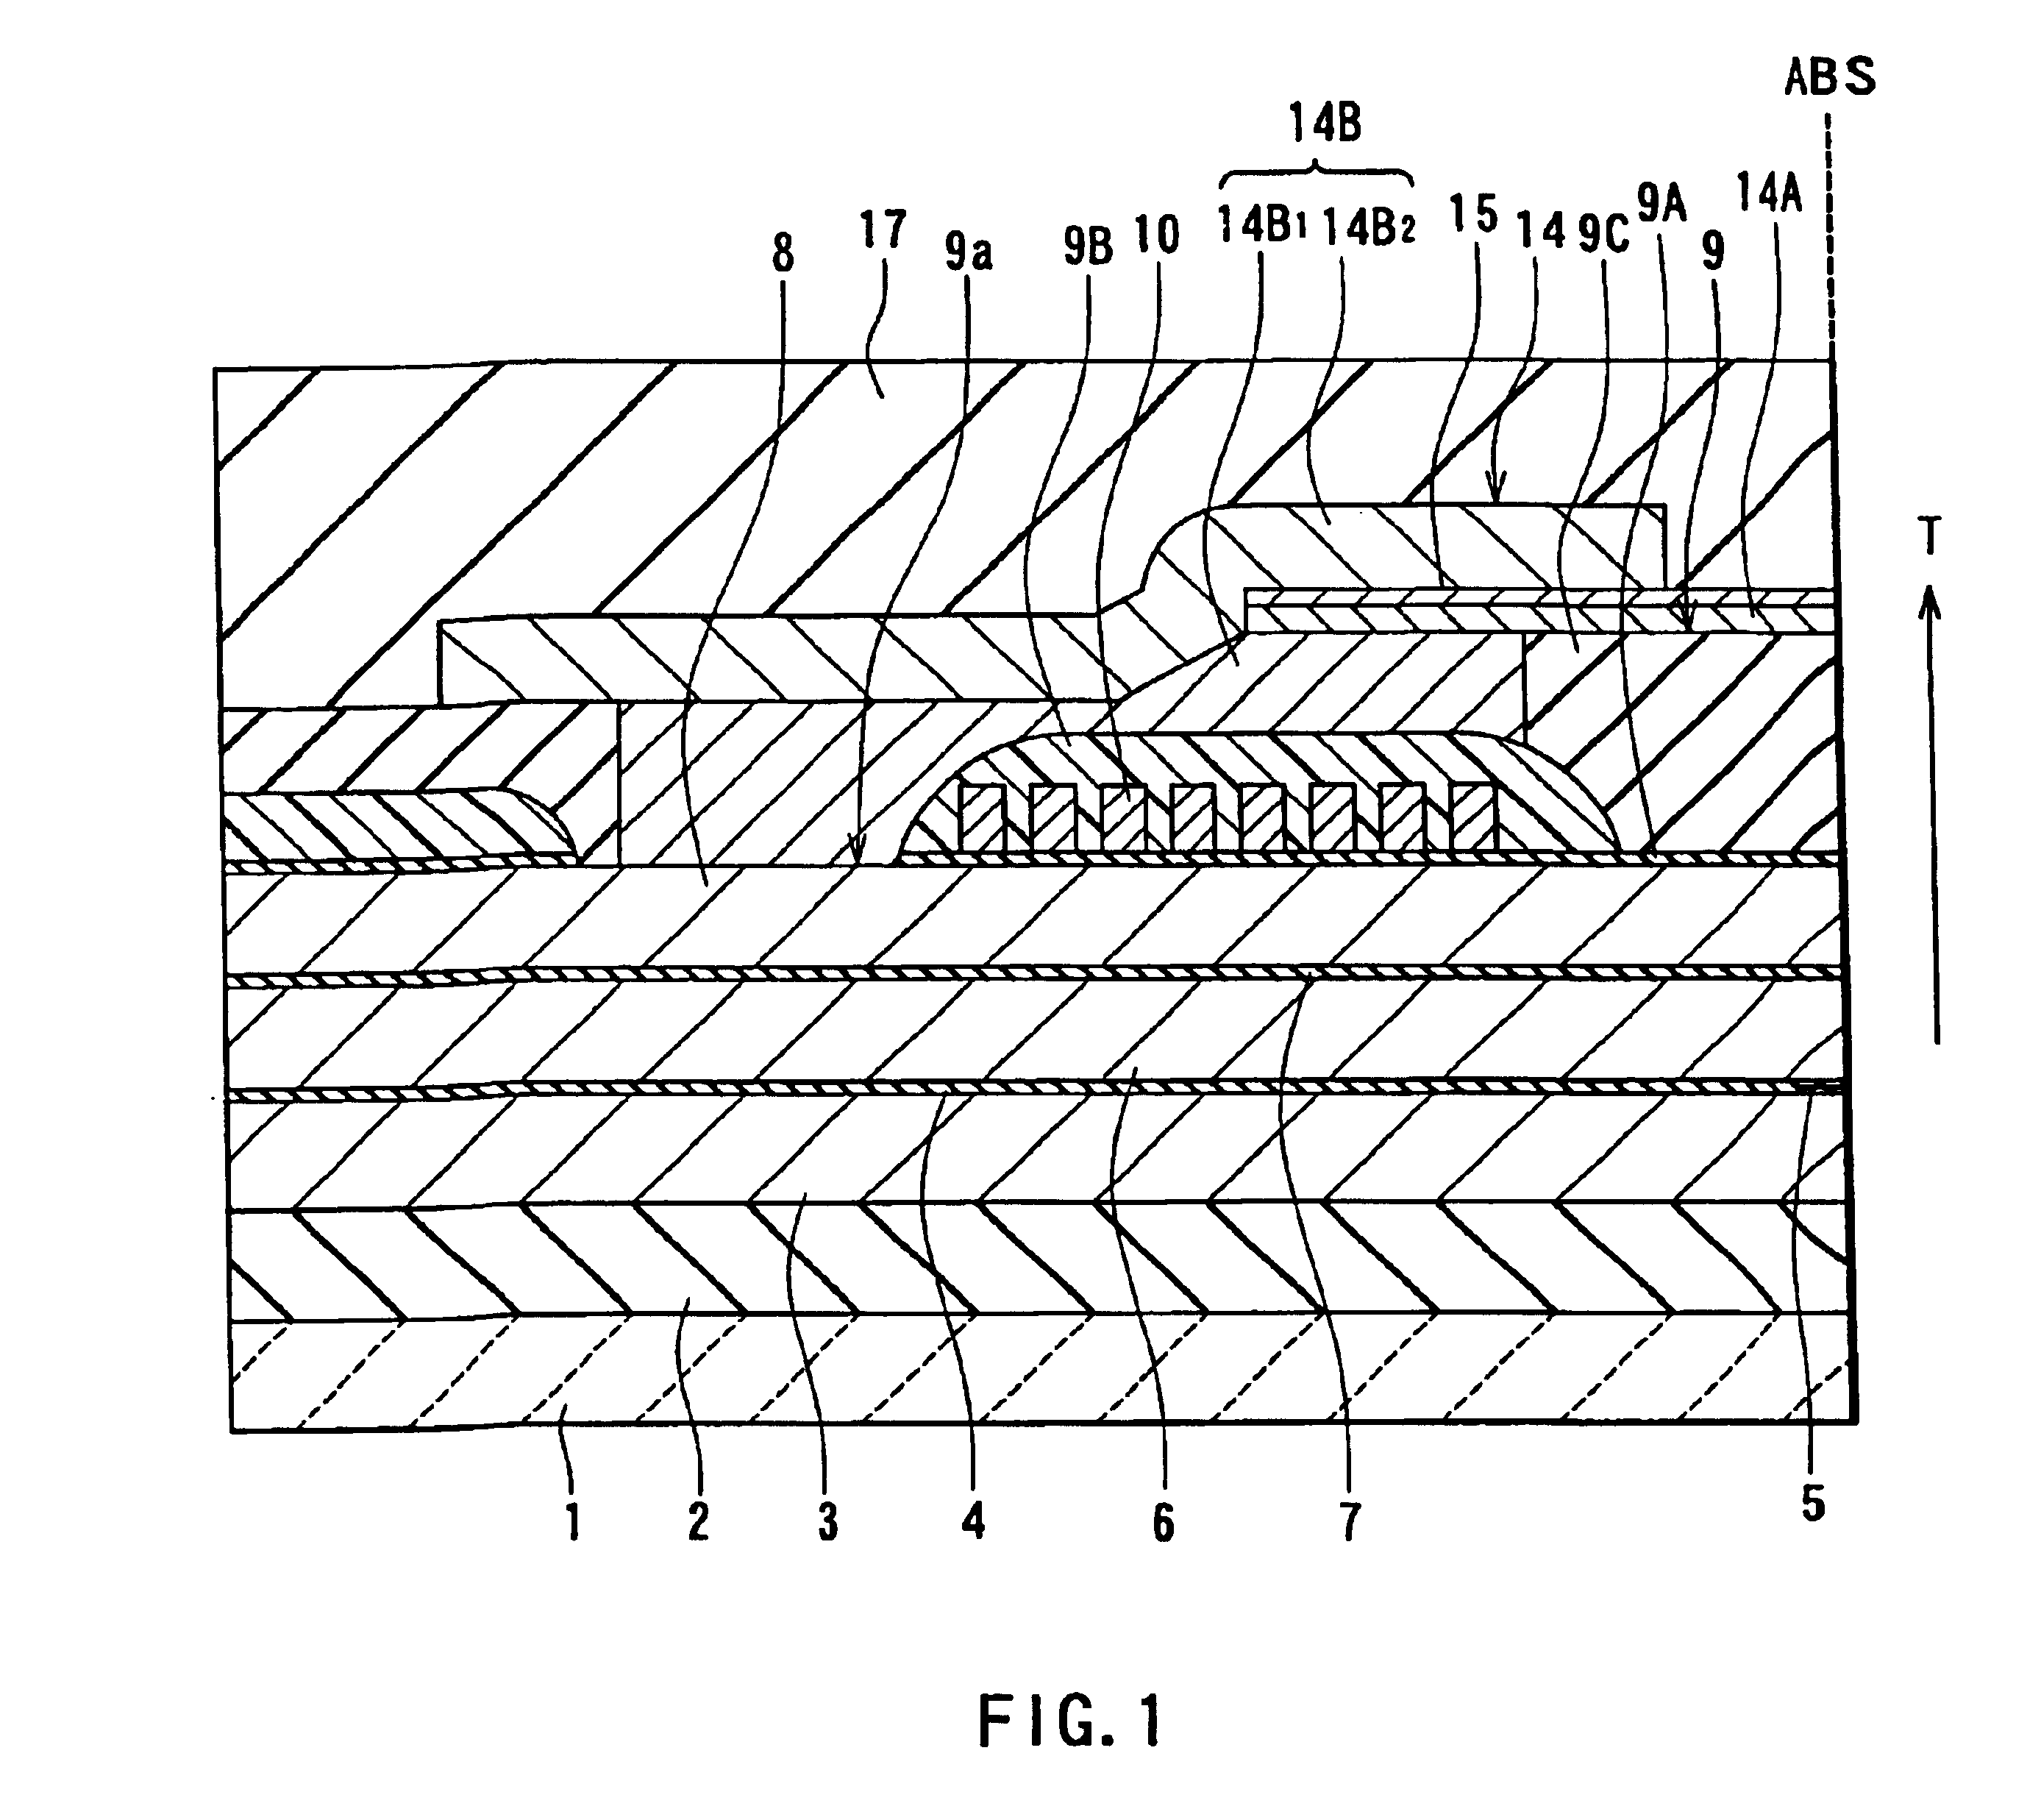 Thin-film magnetic head and method of manufacturing same